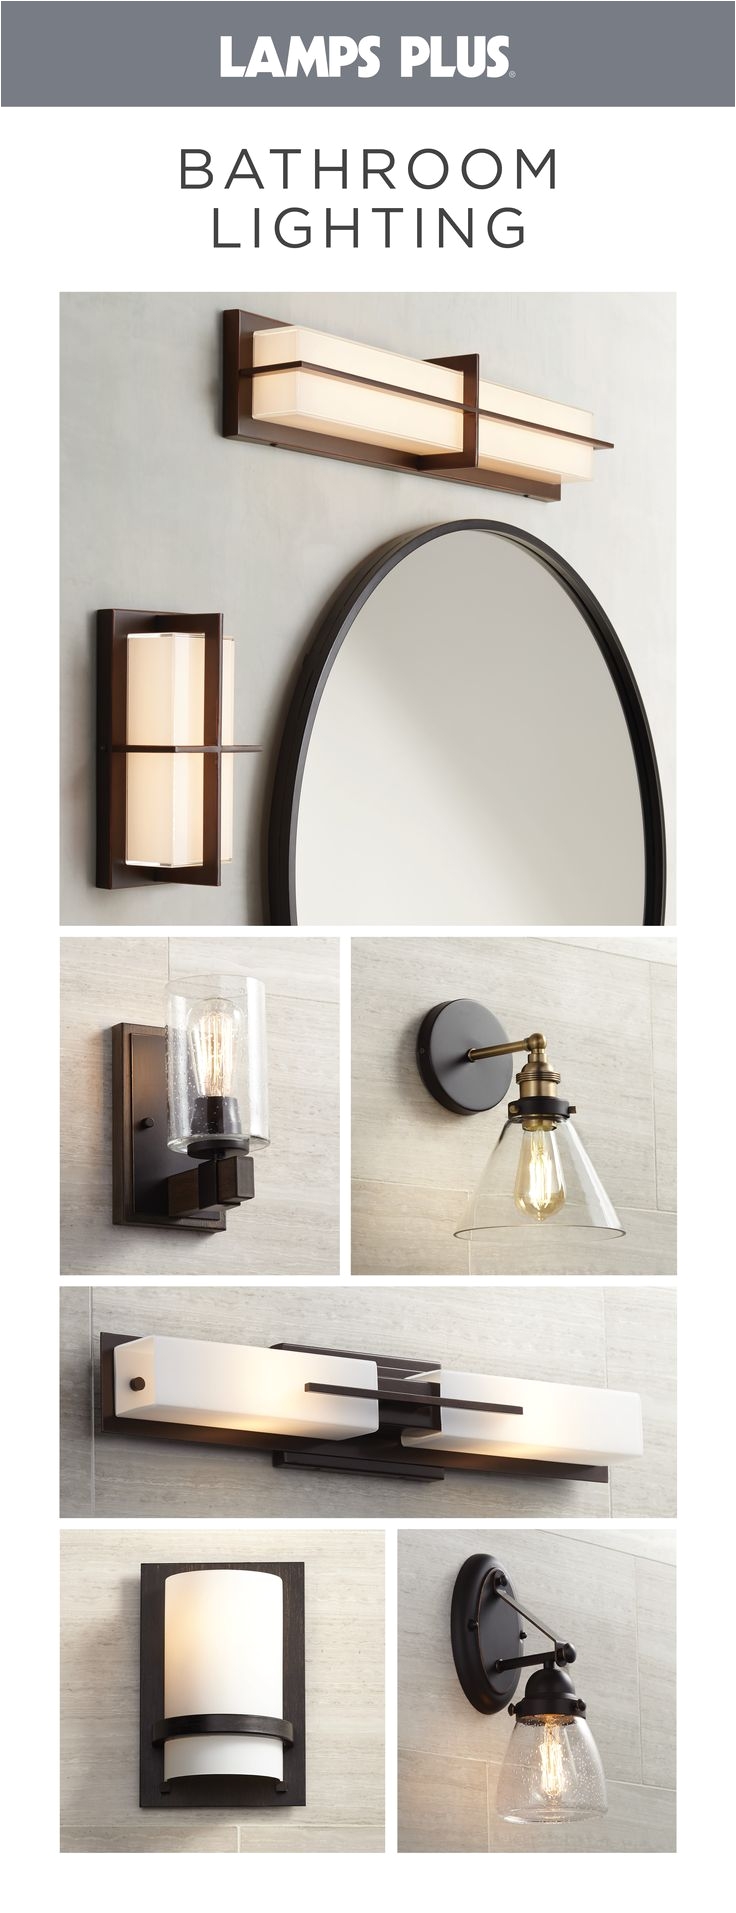 free shipping on our best selling bathroom lighting fixtures we carry the best